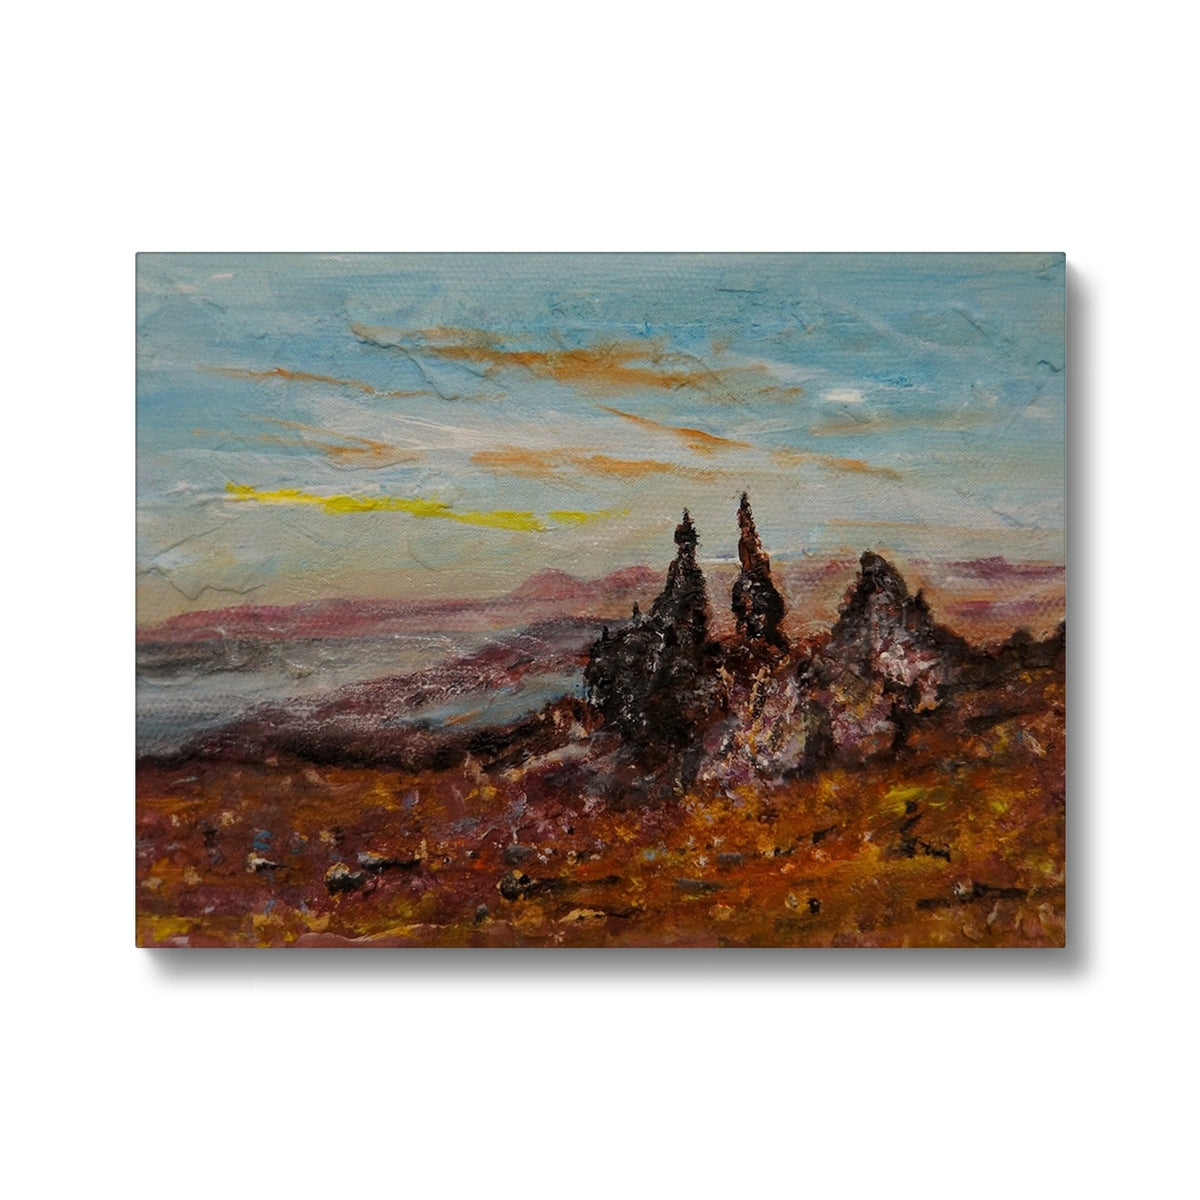 The Storr Skye Painting | Canvas From Scotland-Contemporary Stretched Canvas Prints-Skye Art Gallery-16"x12"-Paintings, Prints, Homeware, Art Gifts From Scotland By Scottish Artist Kevin Hunter